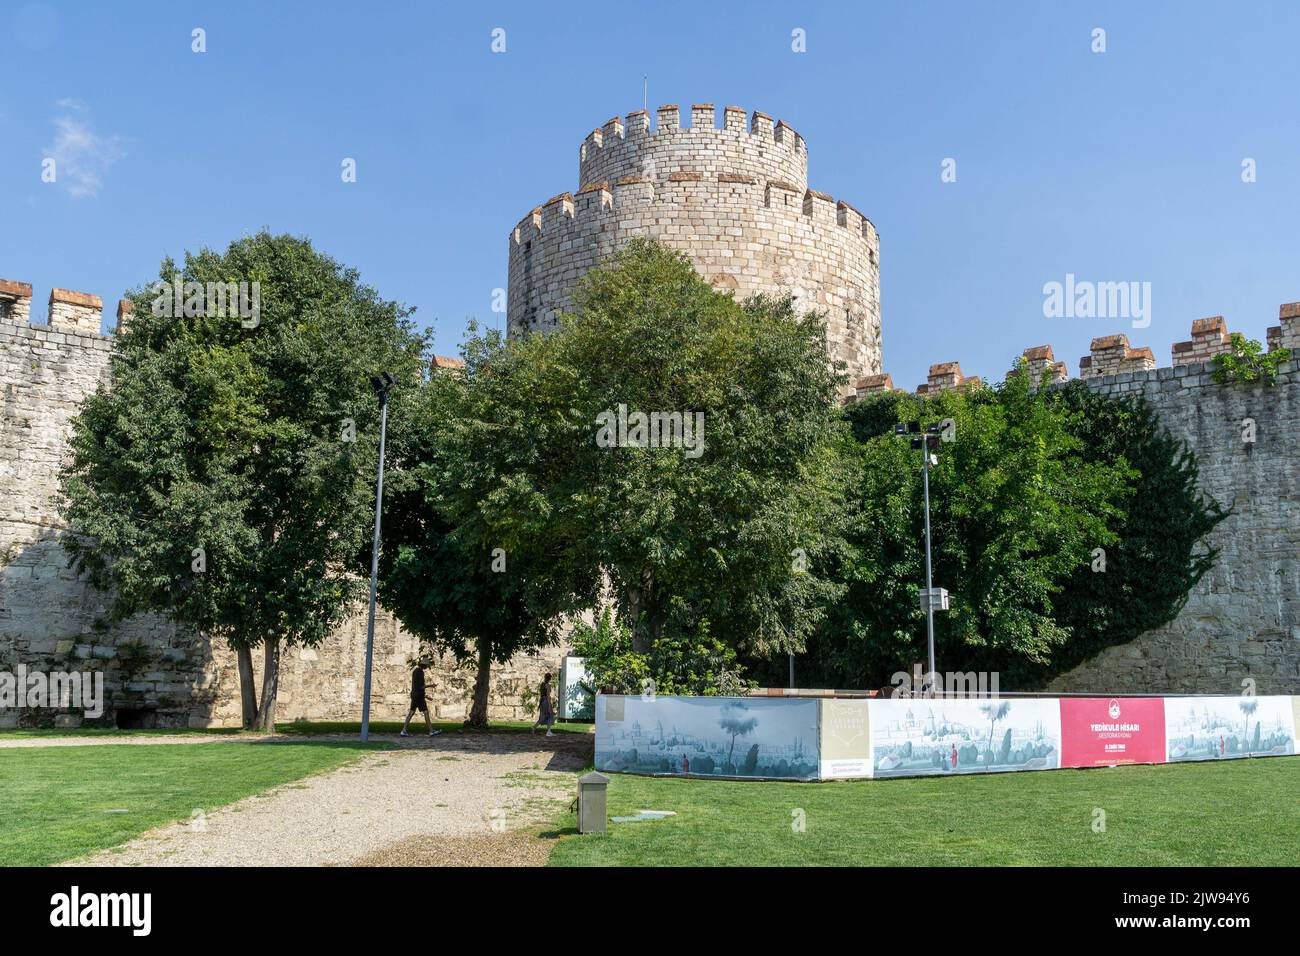 September 2, 2022: Views of the interior, courtyard and surroundings of the Yedikule Fortress Museum, fortified historic structure which was once used as a dungeon, located in the Yedikule neighbourhood of Fatih, in Istanbul, Turkey on September 2, 2022. Built in 1458 on the commission of Ottoman Sultan Mehmed II, the seven-tower complex was created by adding three new towers and fully enclosing a section of the ancient Walls of Constantinople, including the two twin towers that originally constituted the triumphal Golden Gate built by Roman Emperors Theodosius I and Theodosius II. (Credit Ima Stock Photo